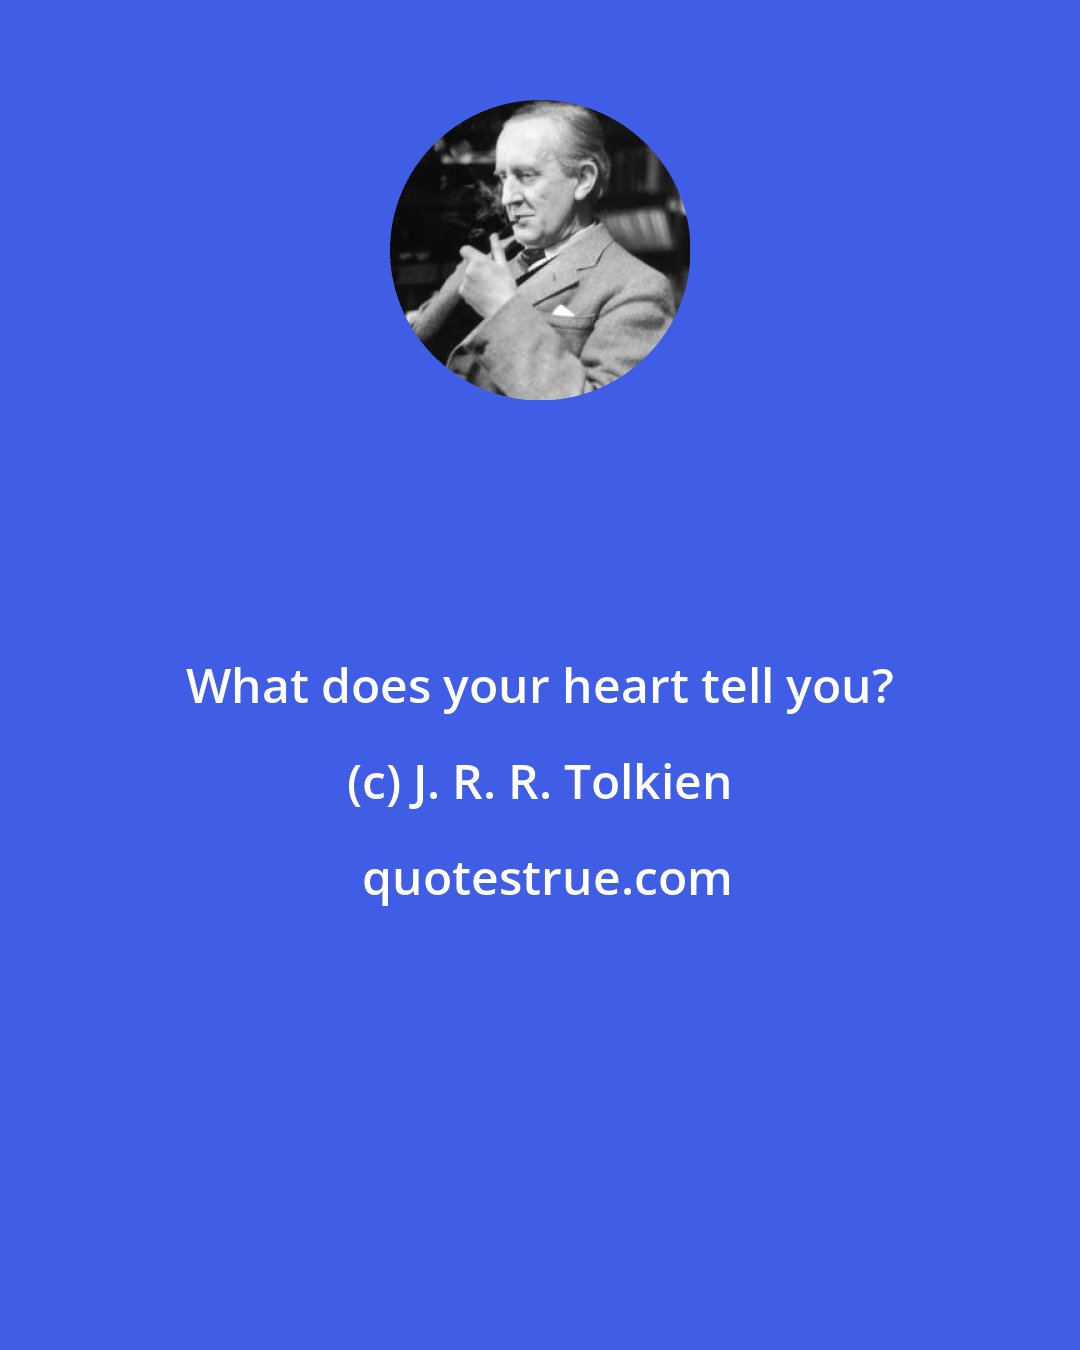 J. R. R. Tolkien: What does your heart tell you?